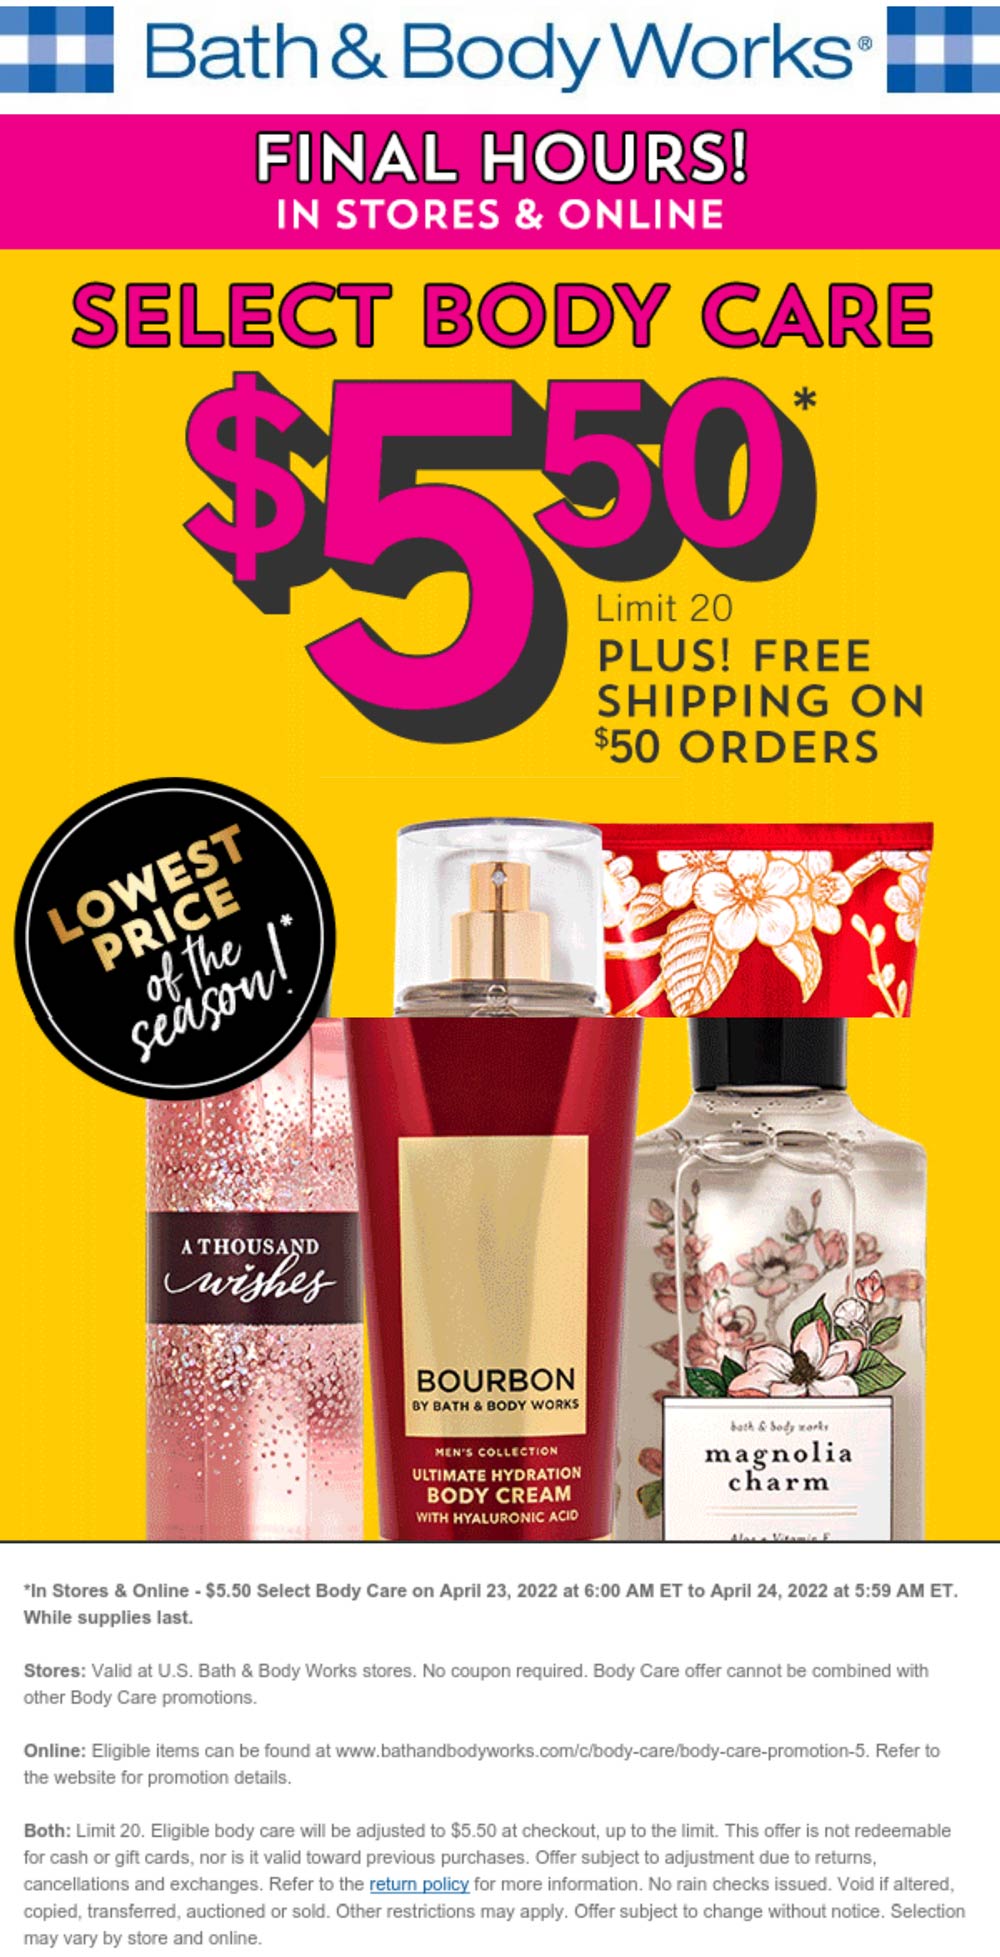 Bath & Body Works stores Coupon  $5.50 body care items today at Bath & Body Works, ditto online #bathbodyworks 